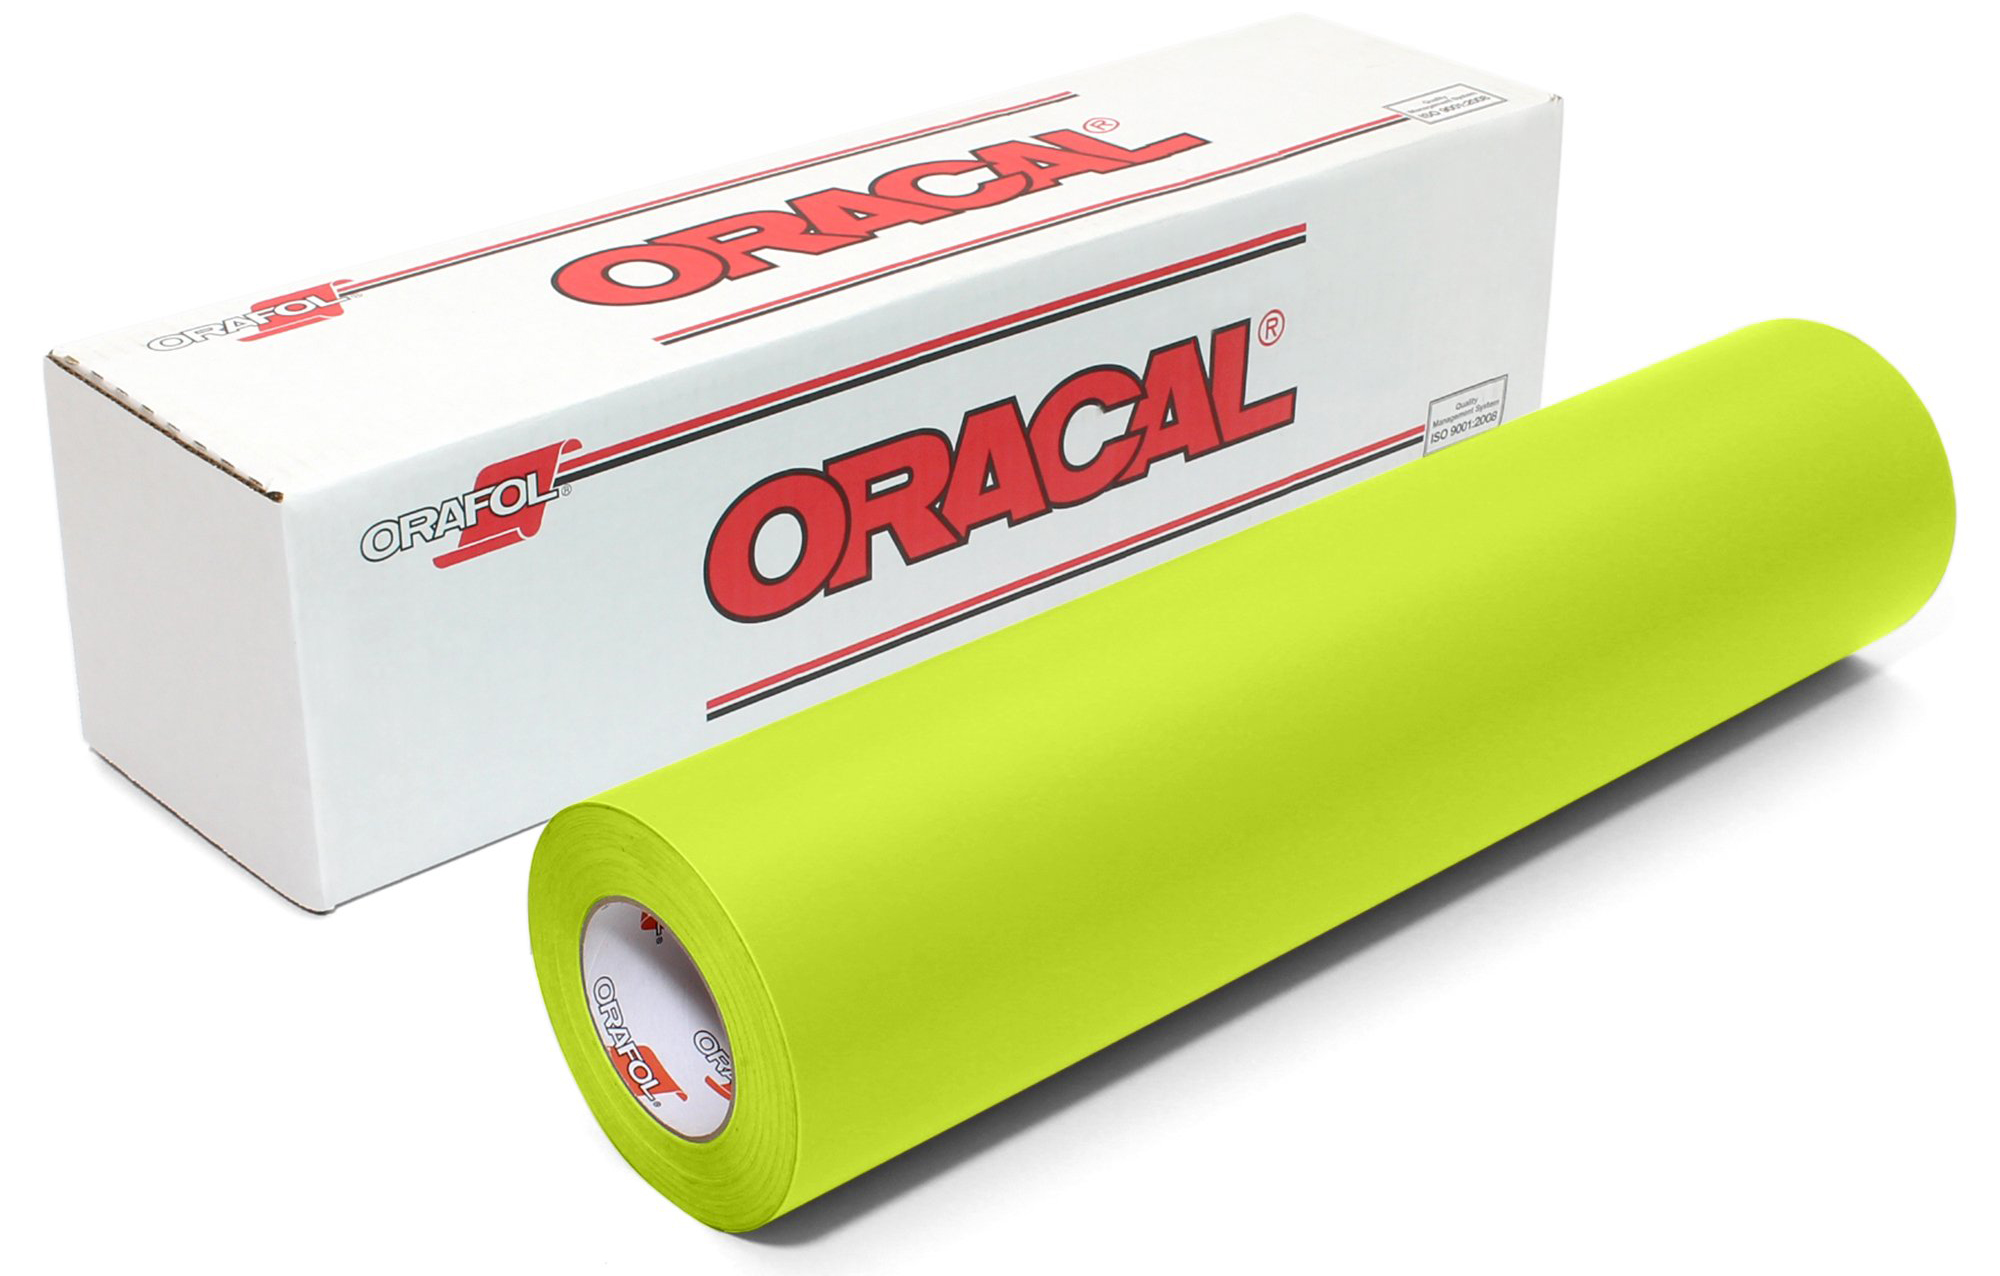 48IN PASTEL GREEN 631 EXHIBITION CAL - Oracal 631 Exhibition Calendered PVC Film